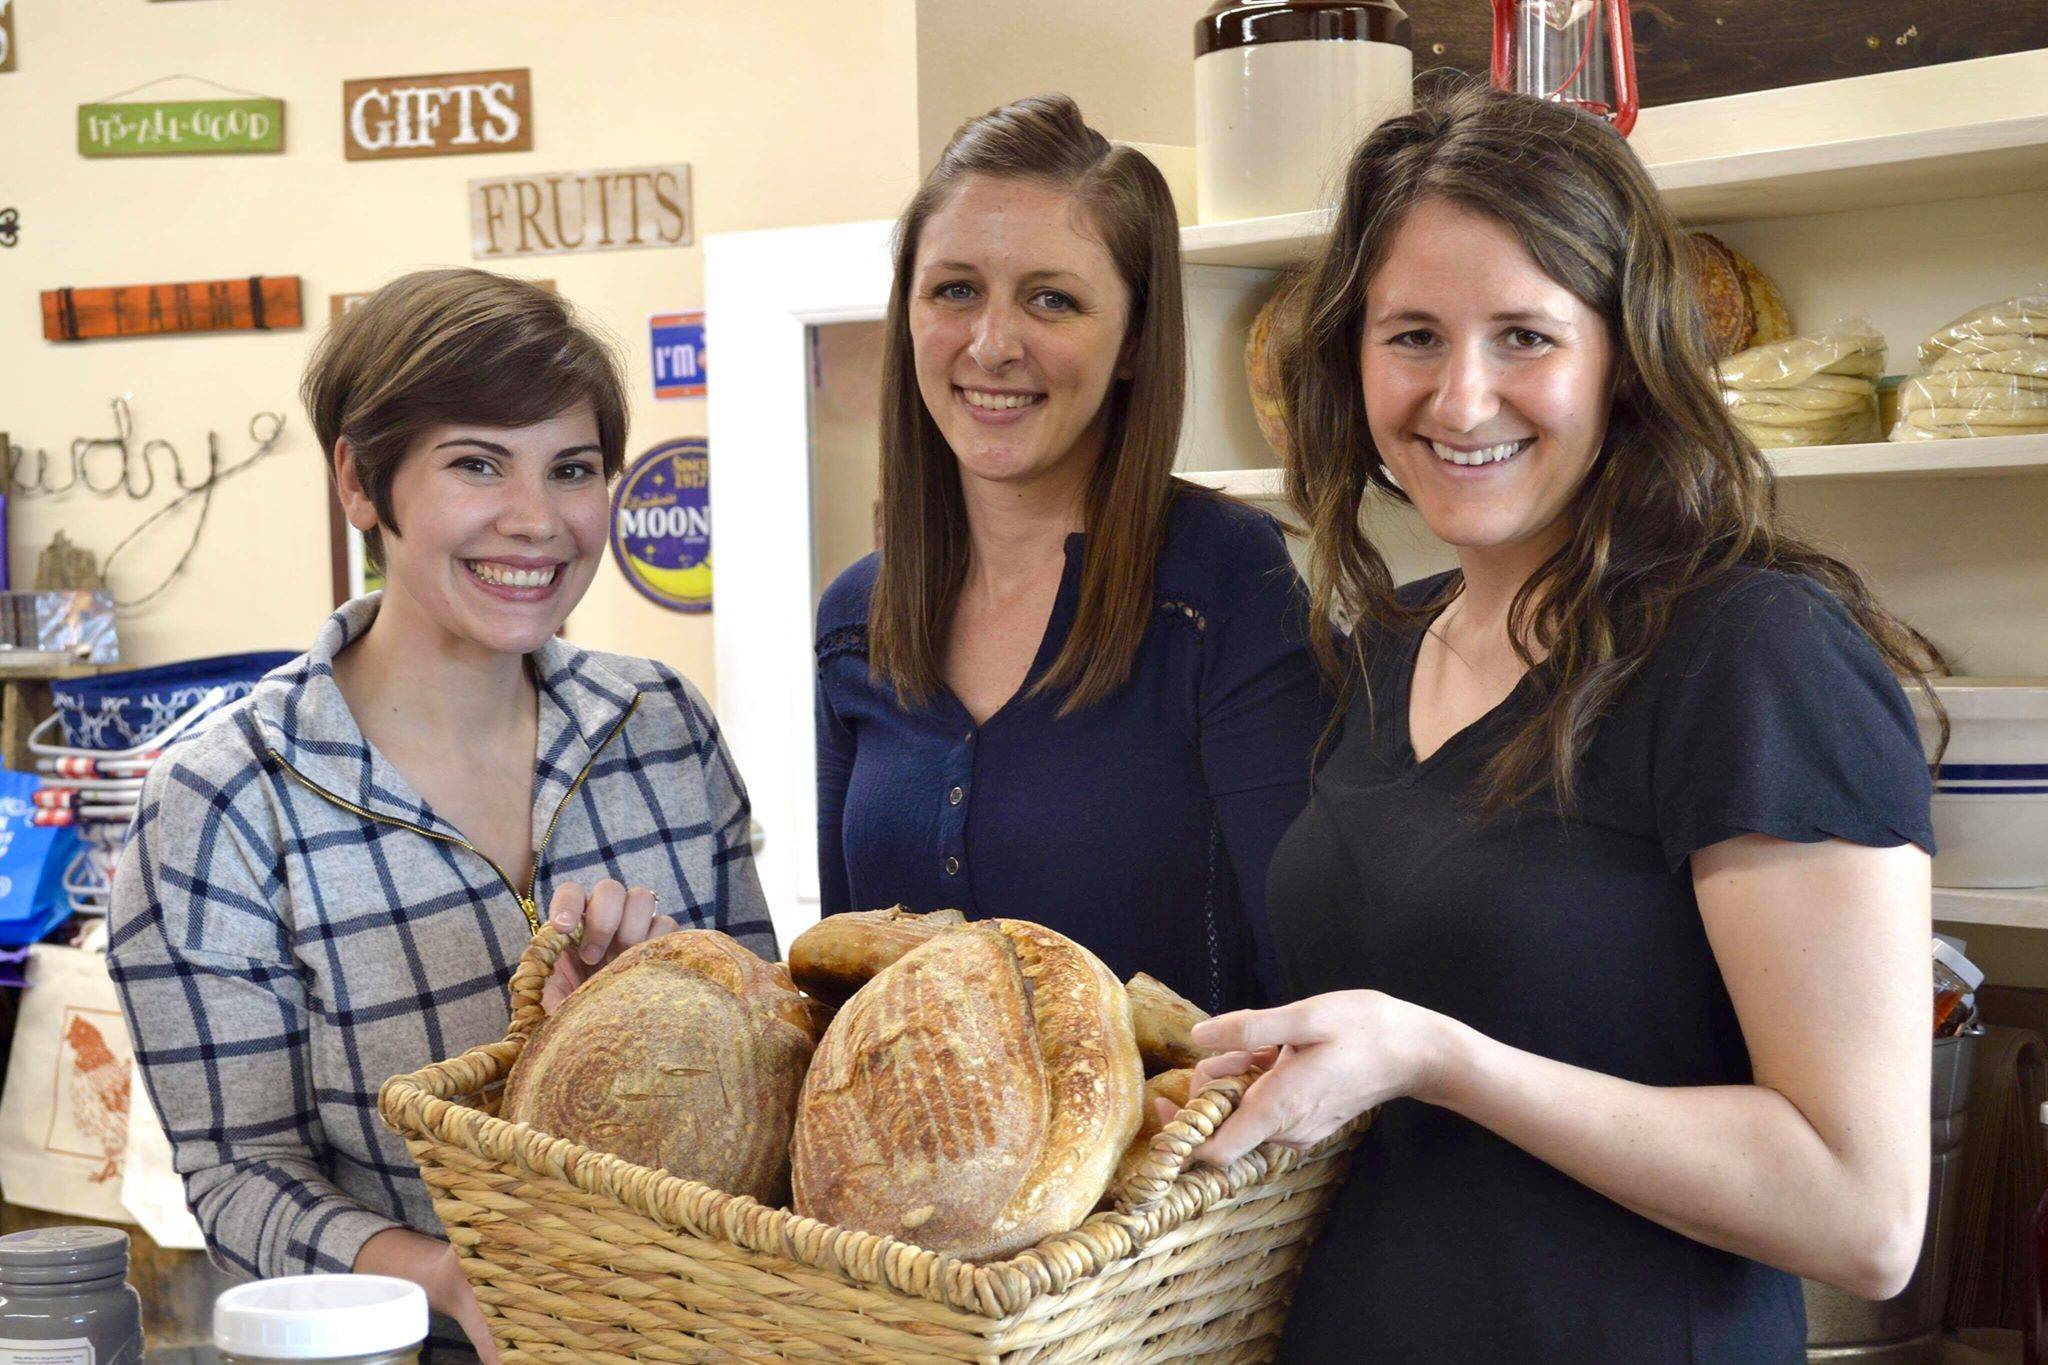 Local sourdough enthusiasts Lacy Ledahl, Maria Nolas and Elizabeth Cox taught a class at Maggie’s General Store about the benefits and baking opportunities of sourdough, Saturday, April 13, 2019, in Kenai, Alaska. (Photo by Victoria Petersen/Peninsula Clarion)